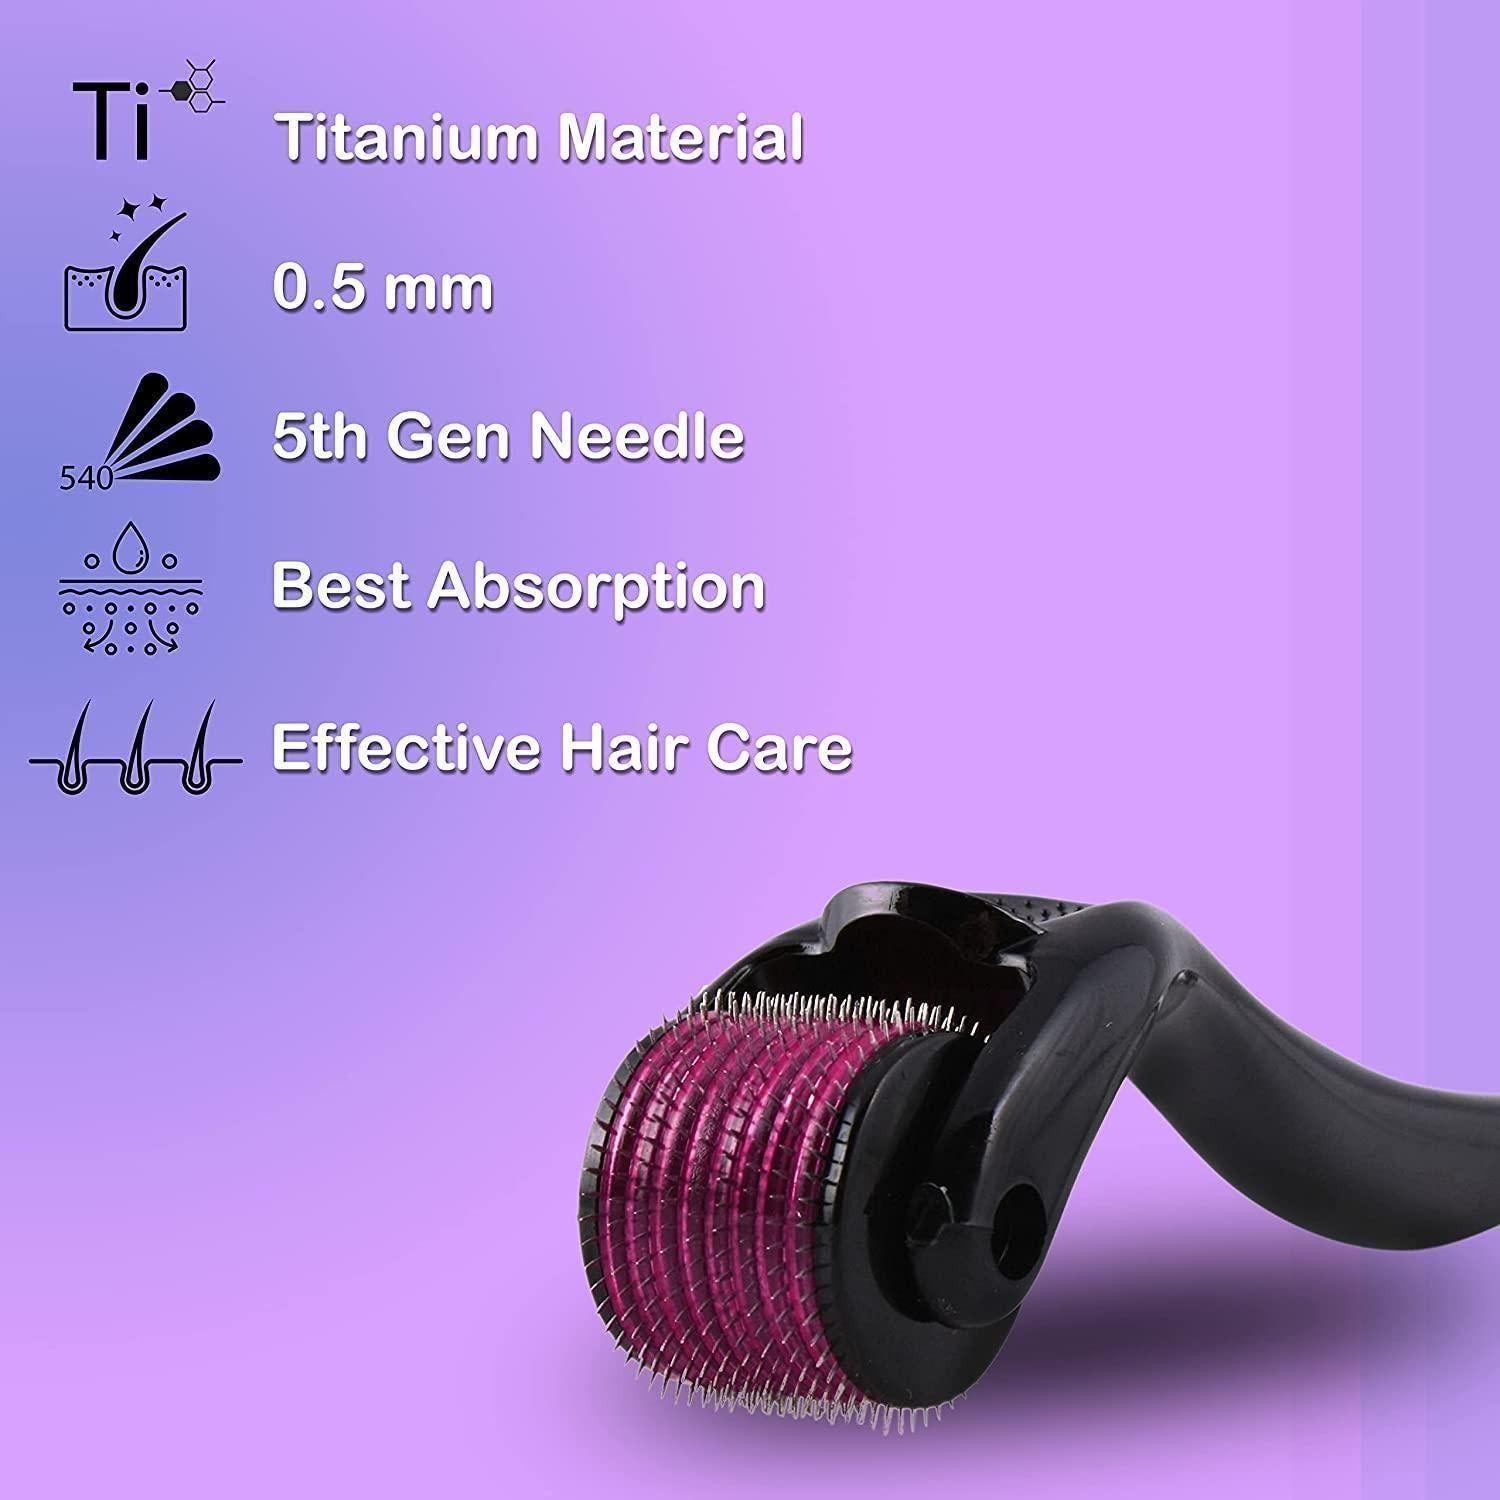 Derma Roller 0.5mm for hair regrowth for men/women - Blossom Mantra